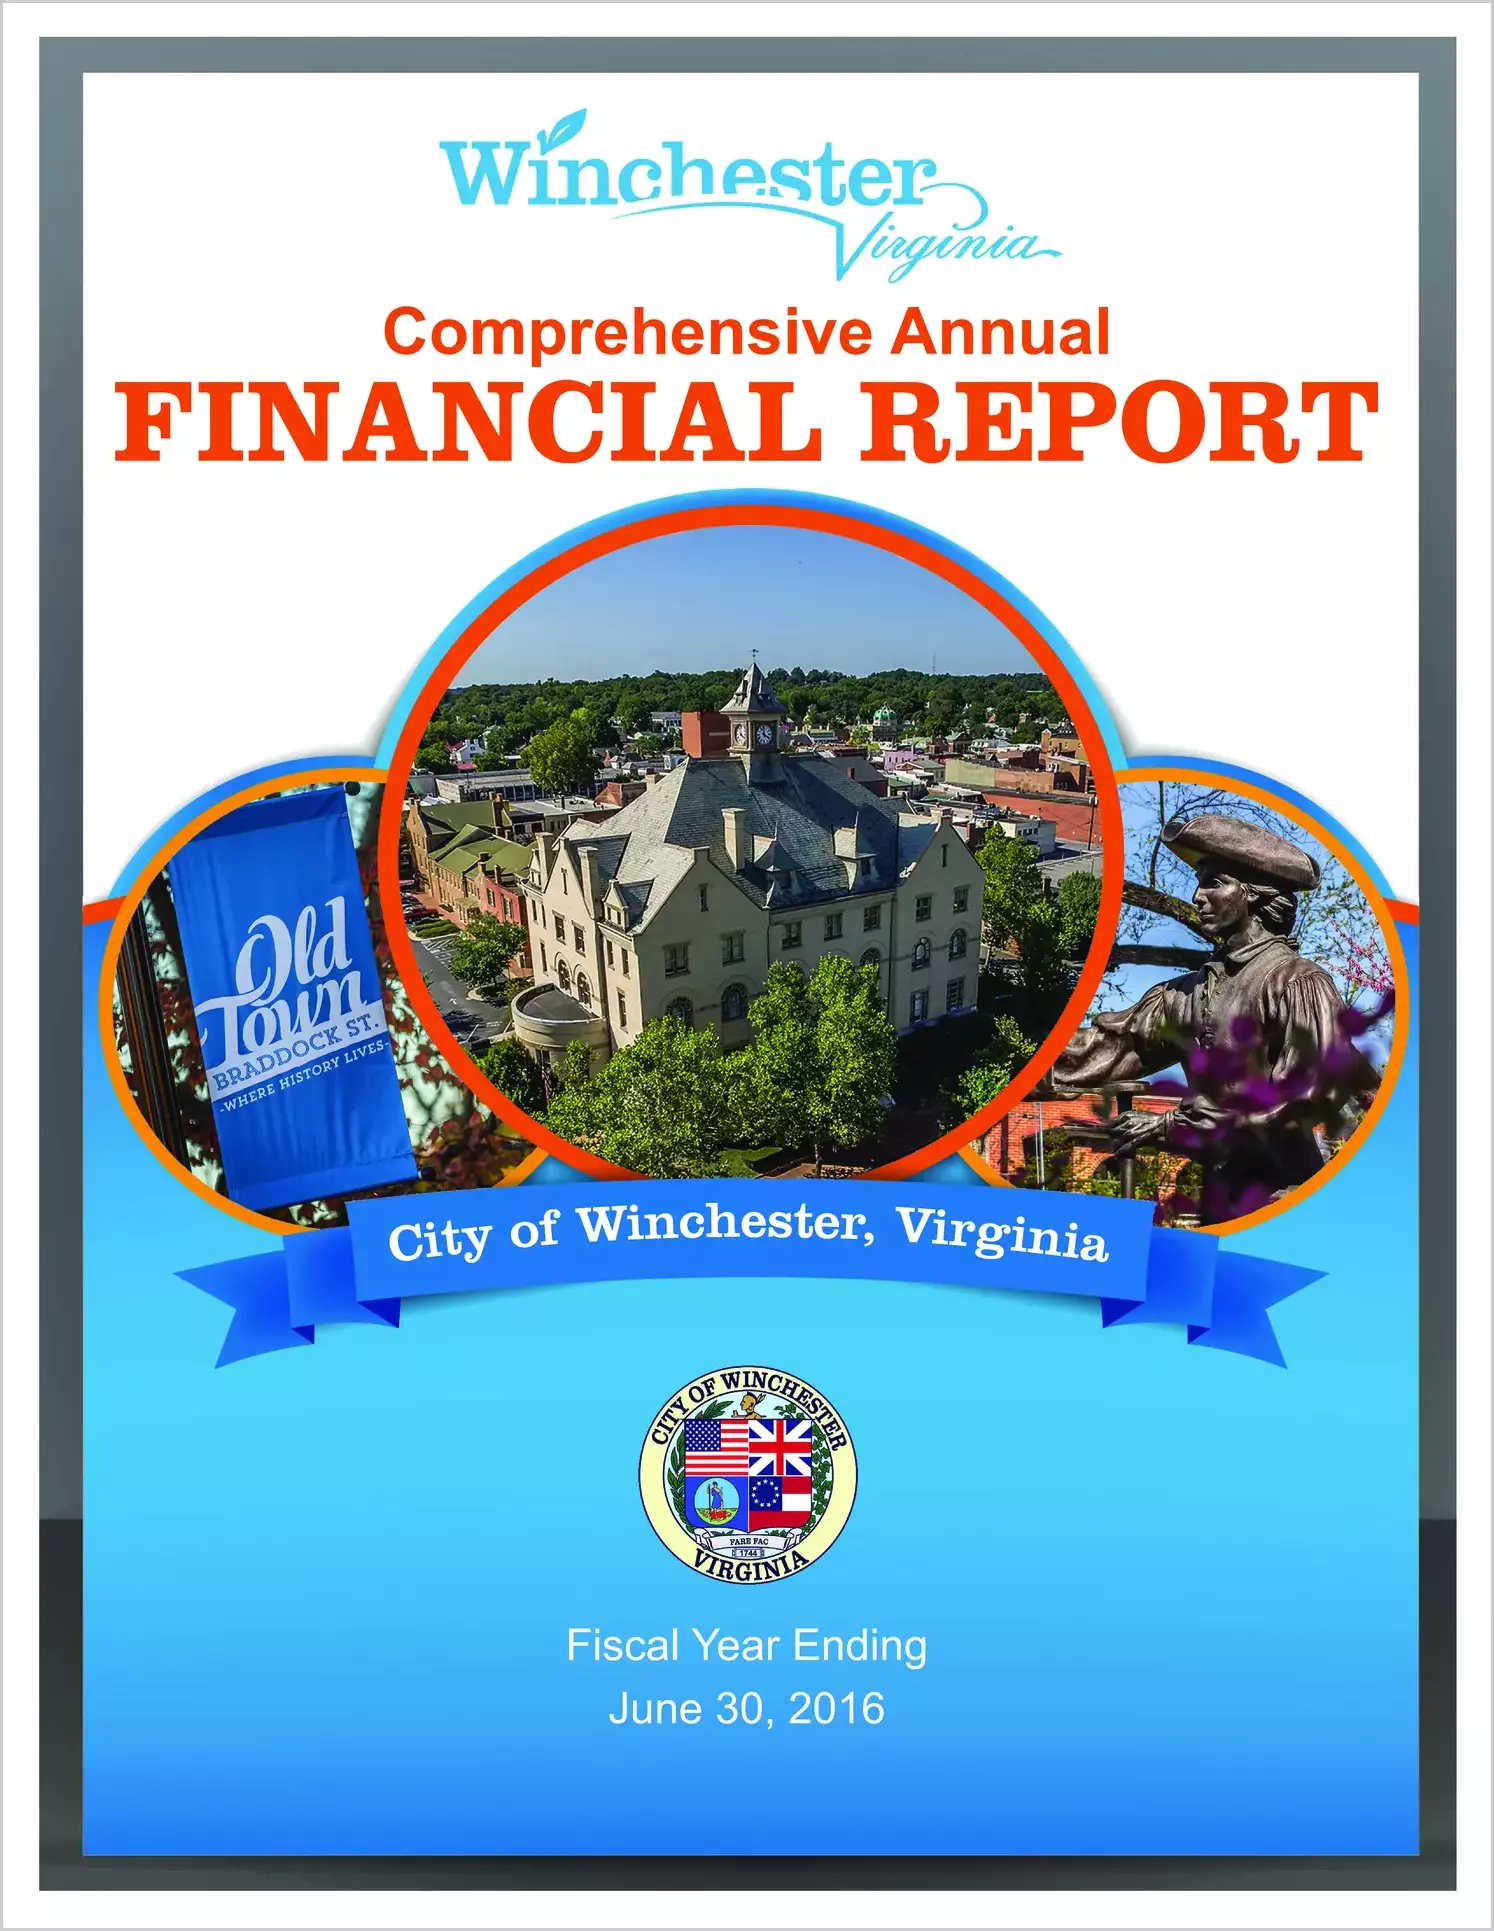 2016 Annual Financial Report for City of Winchester